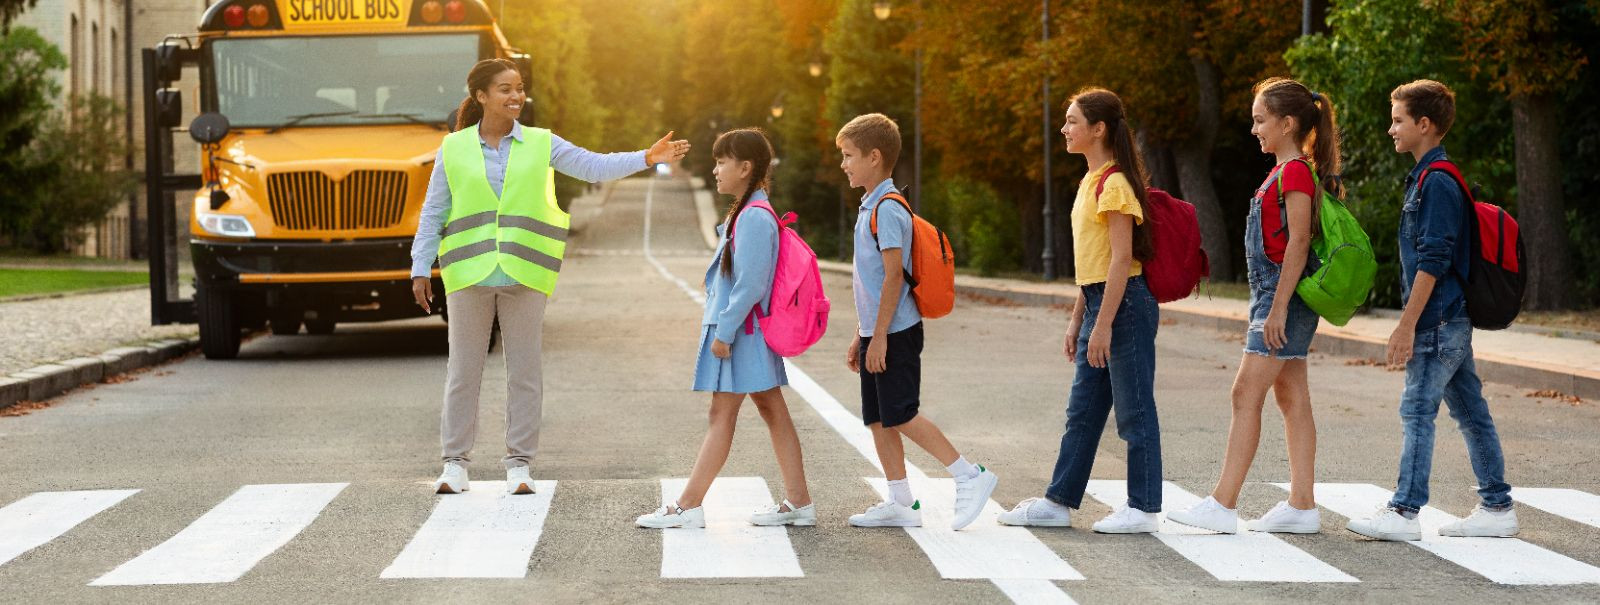 Every year, countless children are involved in traffic-related accidents, some of which have fatal outcomes. Understanding the risks and teaching kids about tra